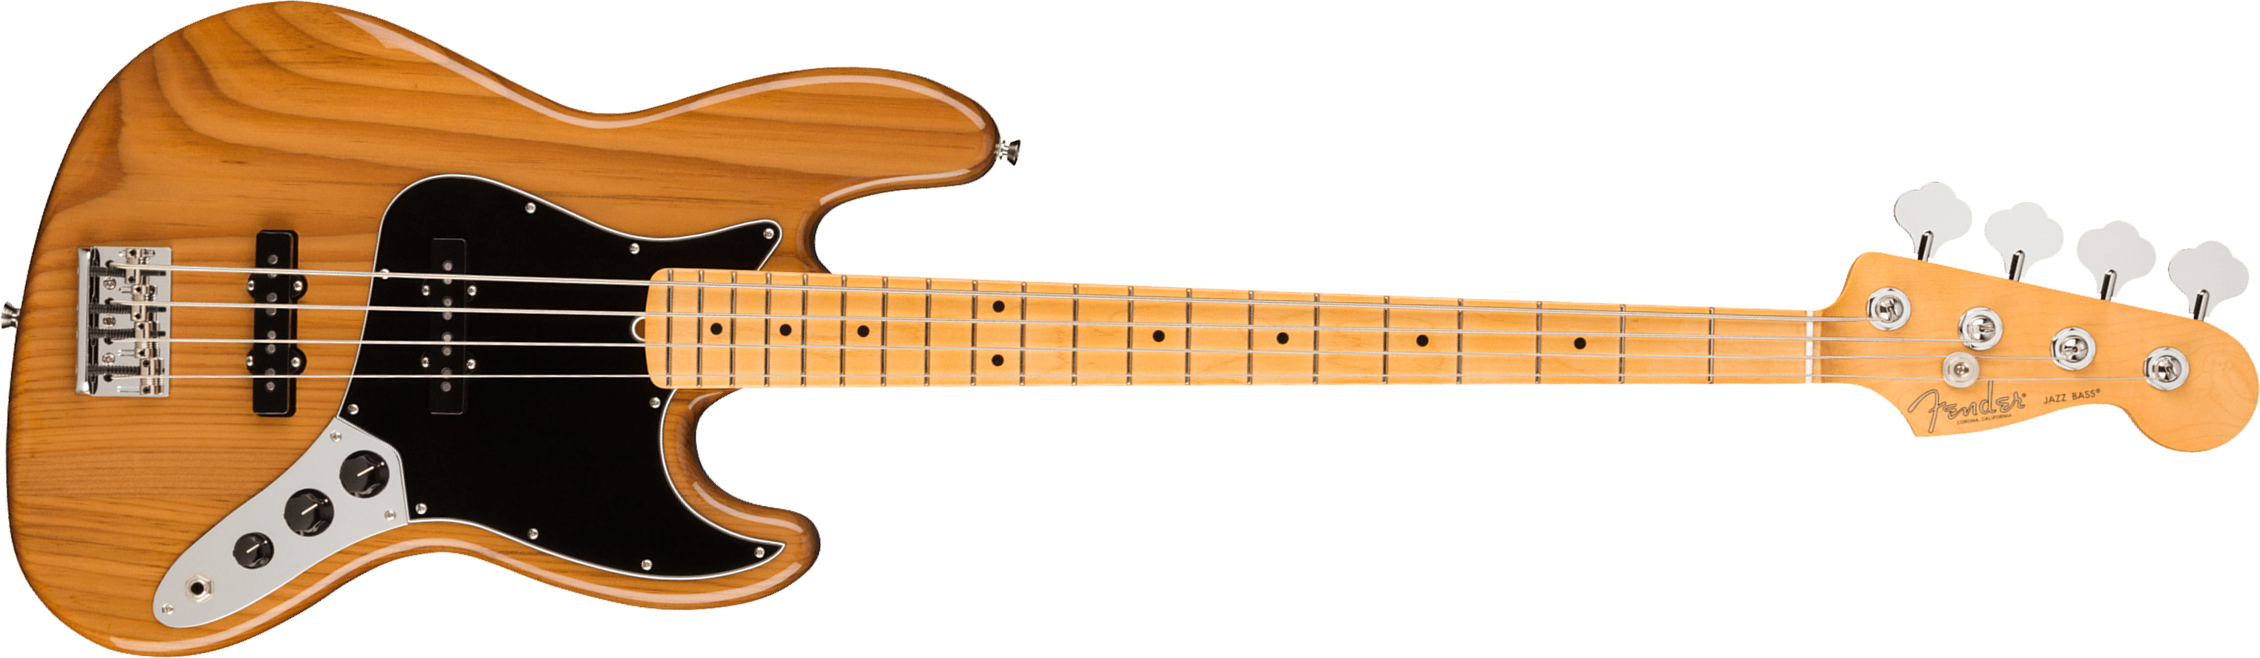 Fender Jazz Bass American Professional Ii Usa Mn - Roasted Pine - Solidbody E-bass - Main picture